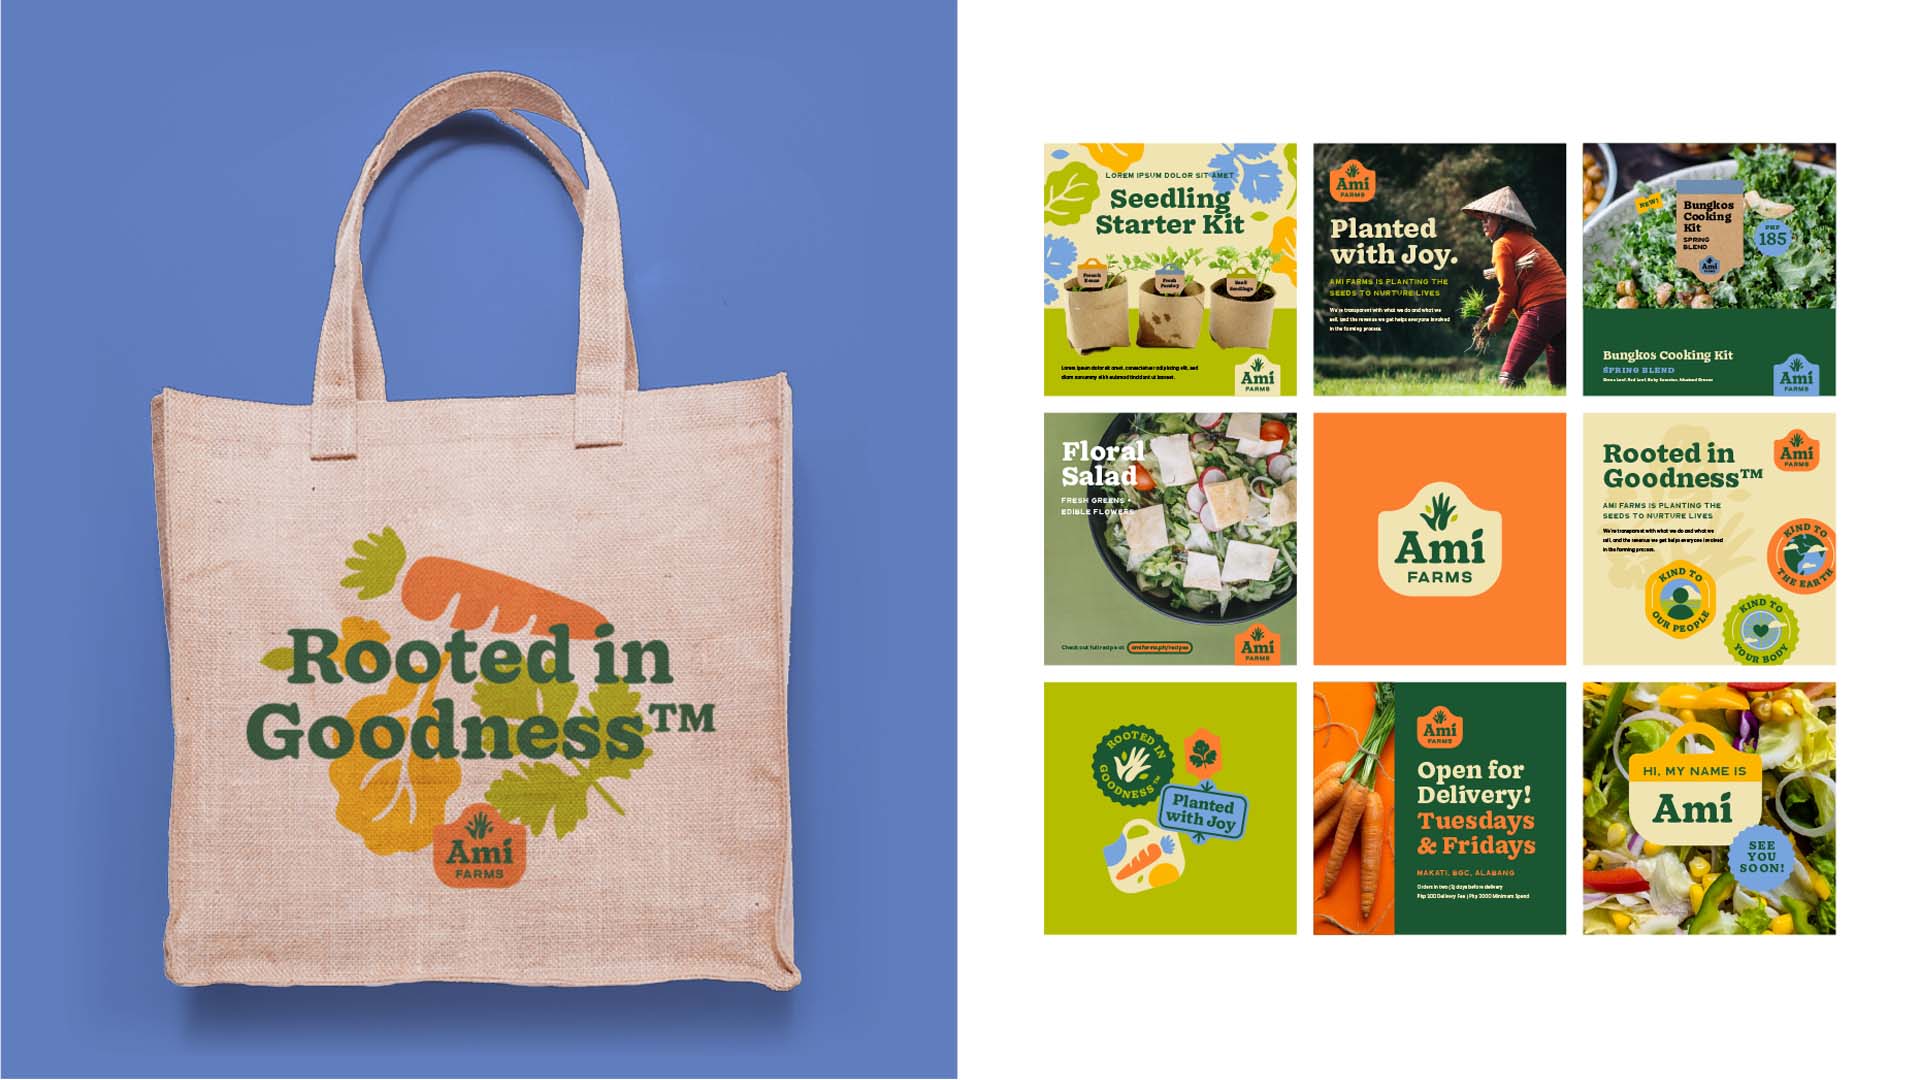 Colorful canvas tote bag and social media content template layout designs for bidynamic farm and brand Ami Farms